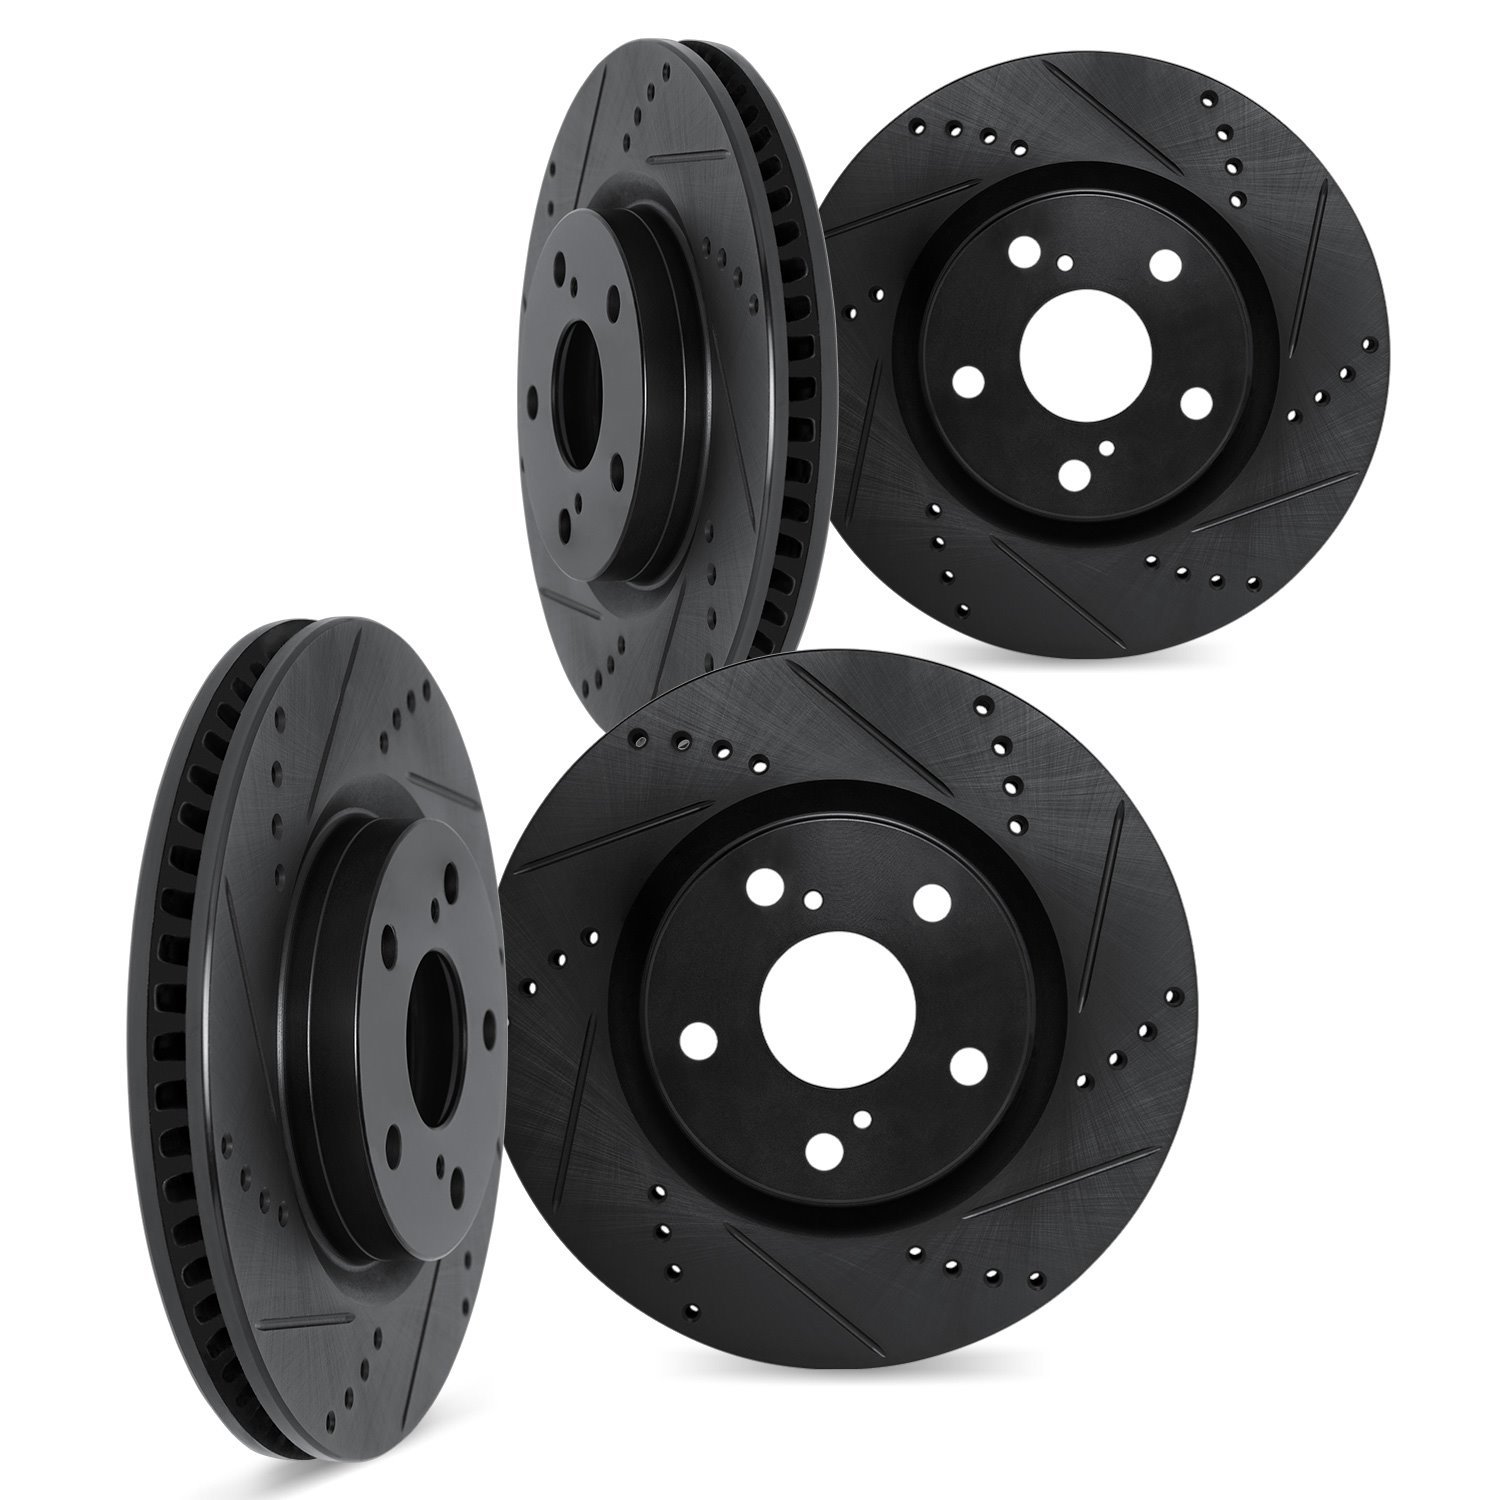 8004-48020 Drilled/Slotted Brake Rotors [Black], 1998-2005 GM, Position: Front and Rear